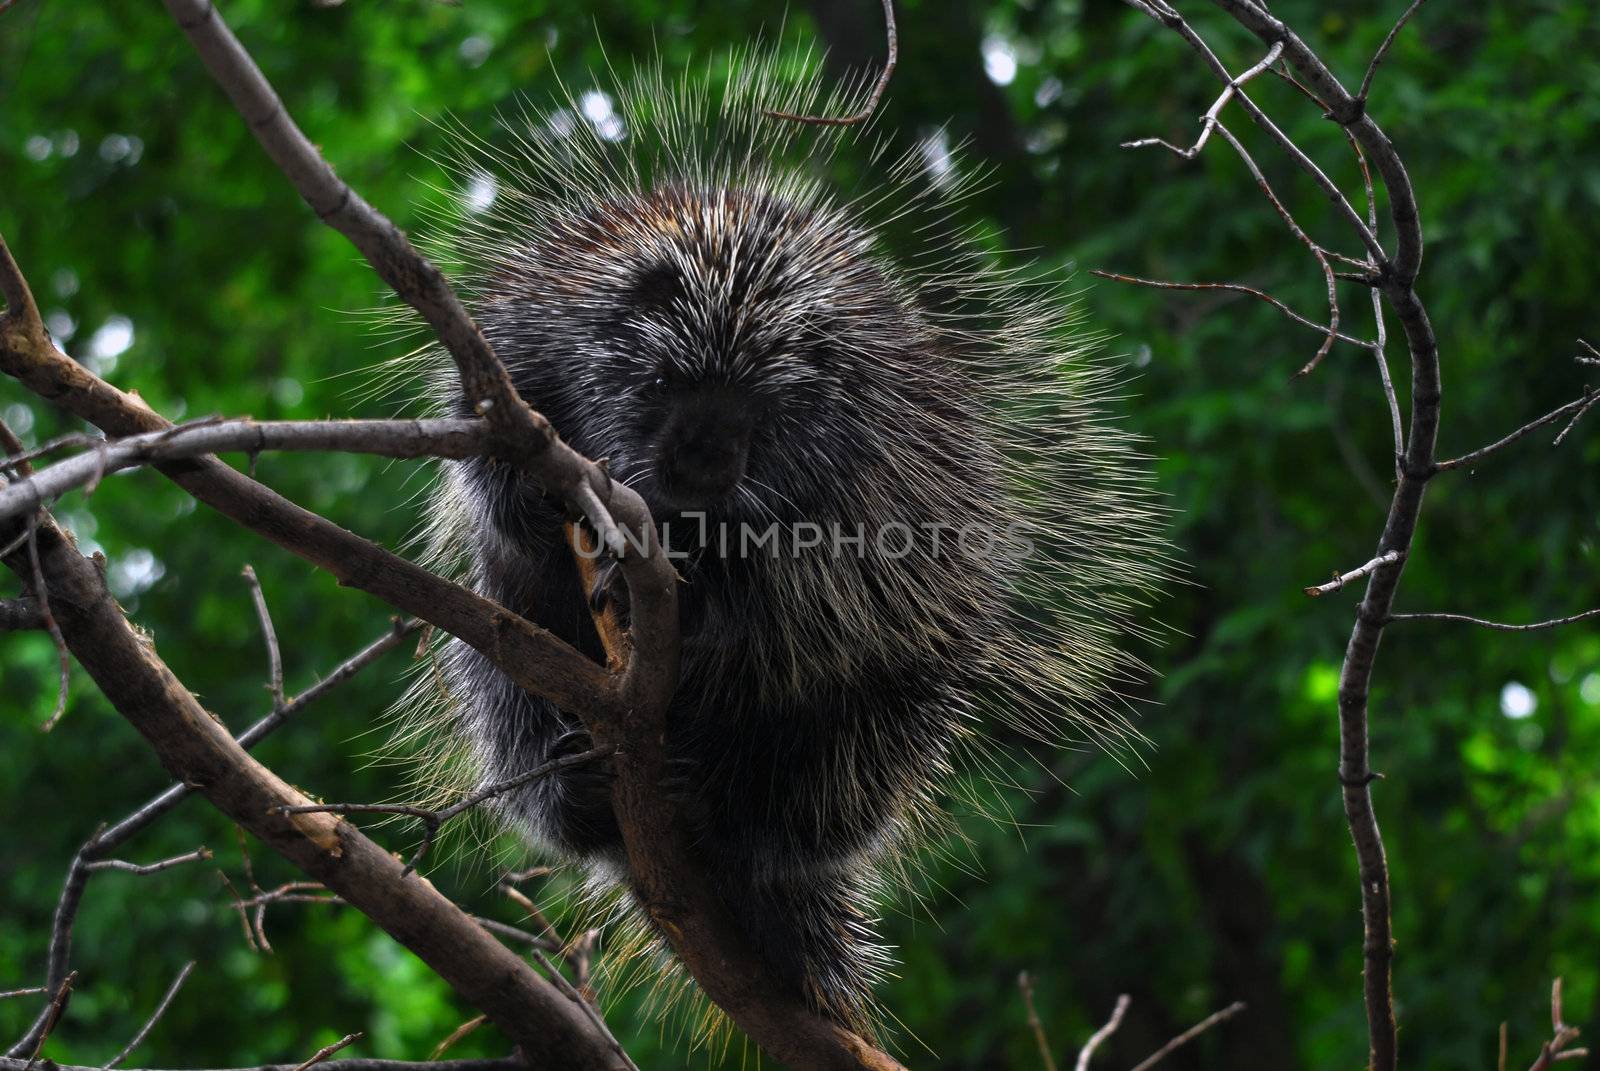 Close-up portrait of a big porcupine in a tree